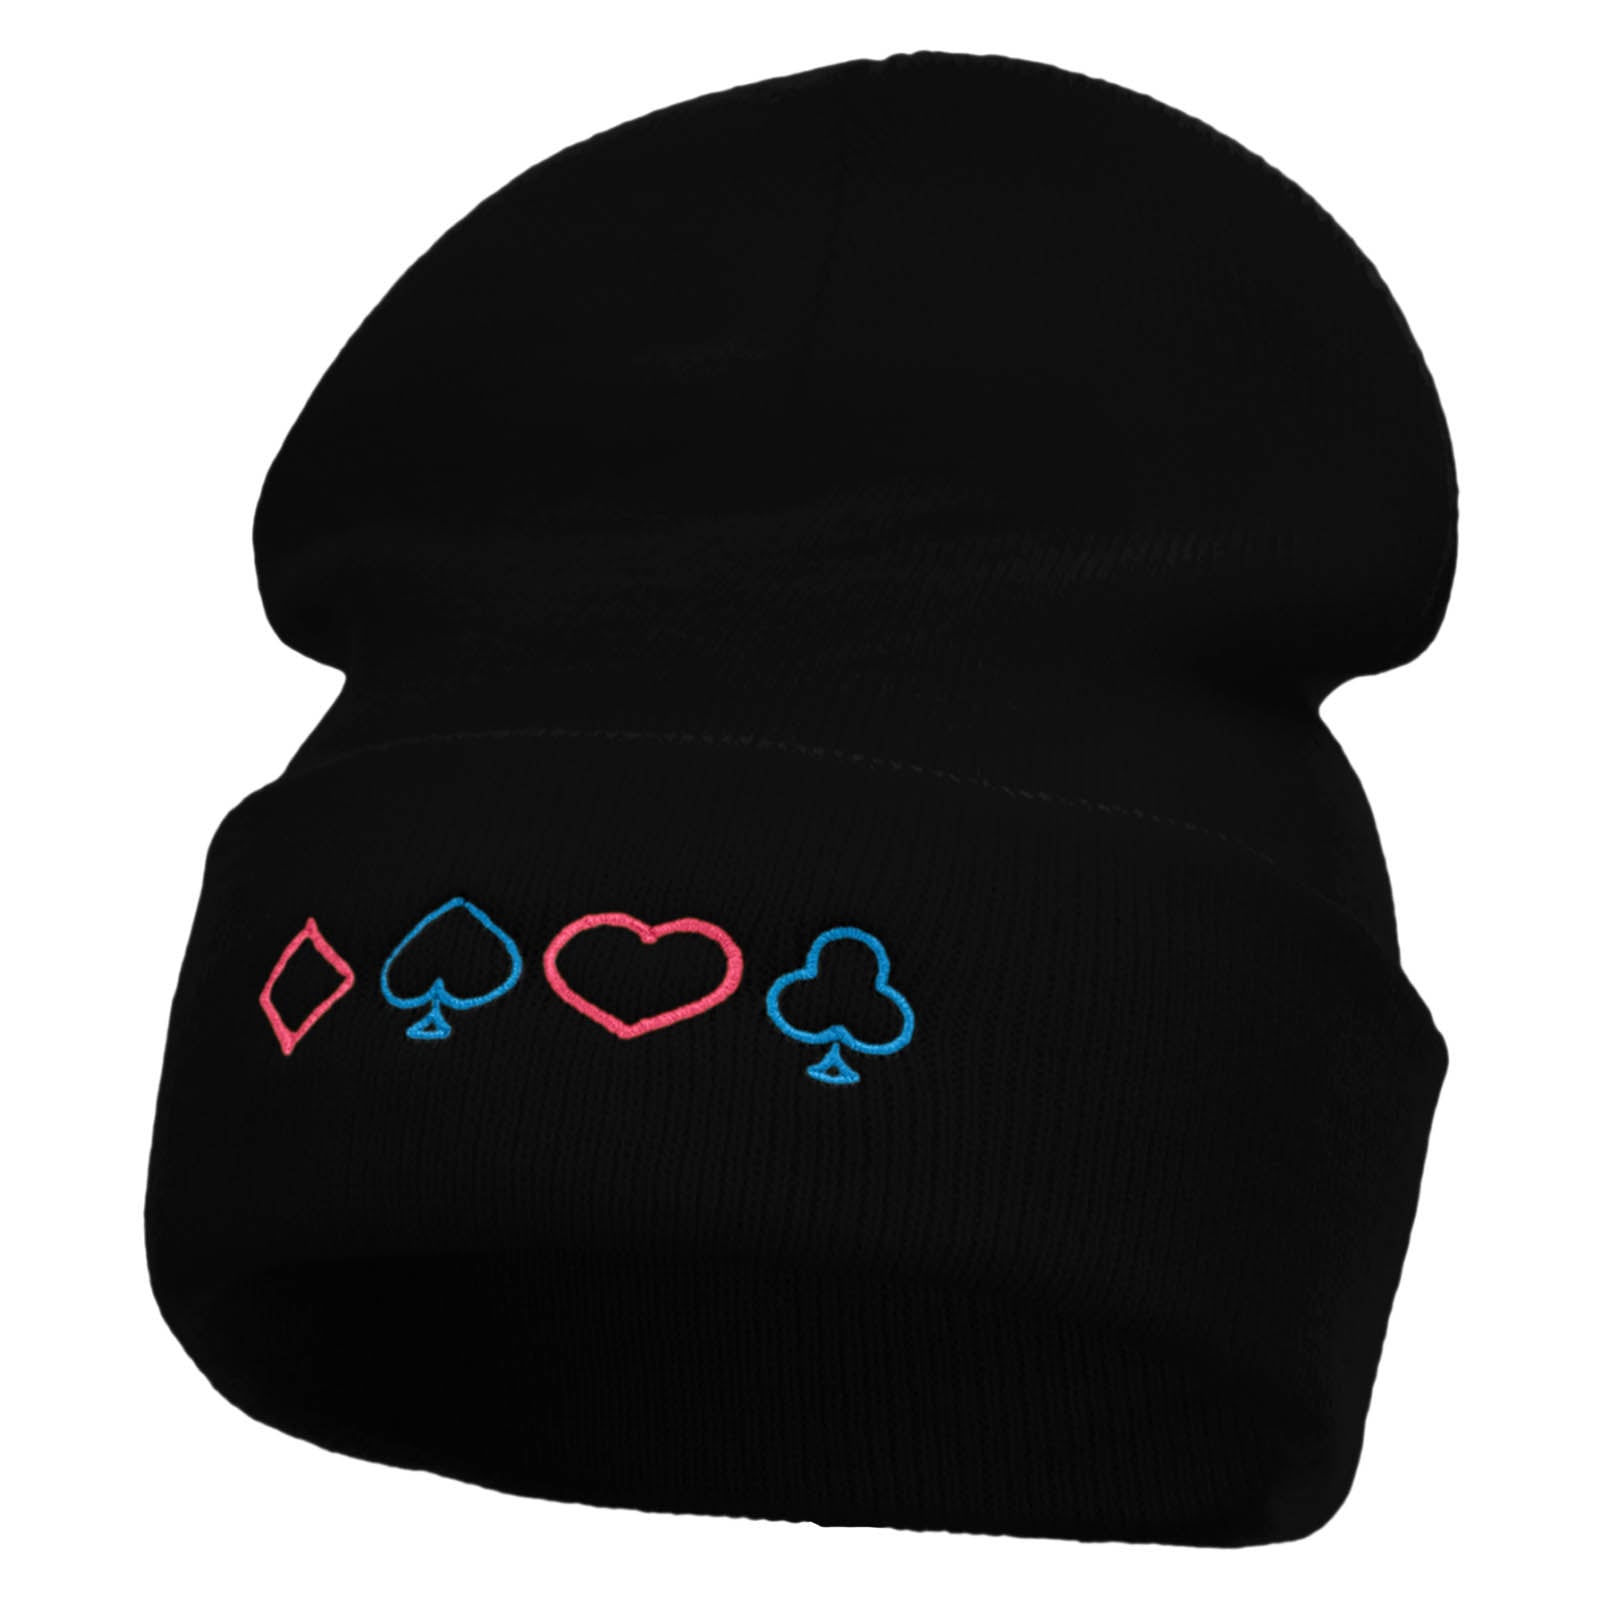 The Neon Card Suits Embroidered 12 Inch Long Knitted Beanie - Black OSFM